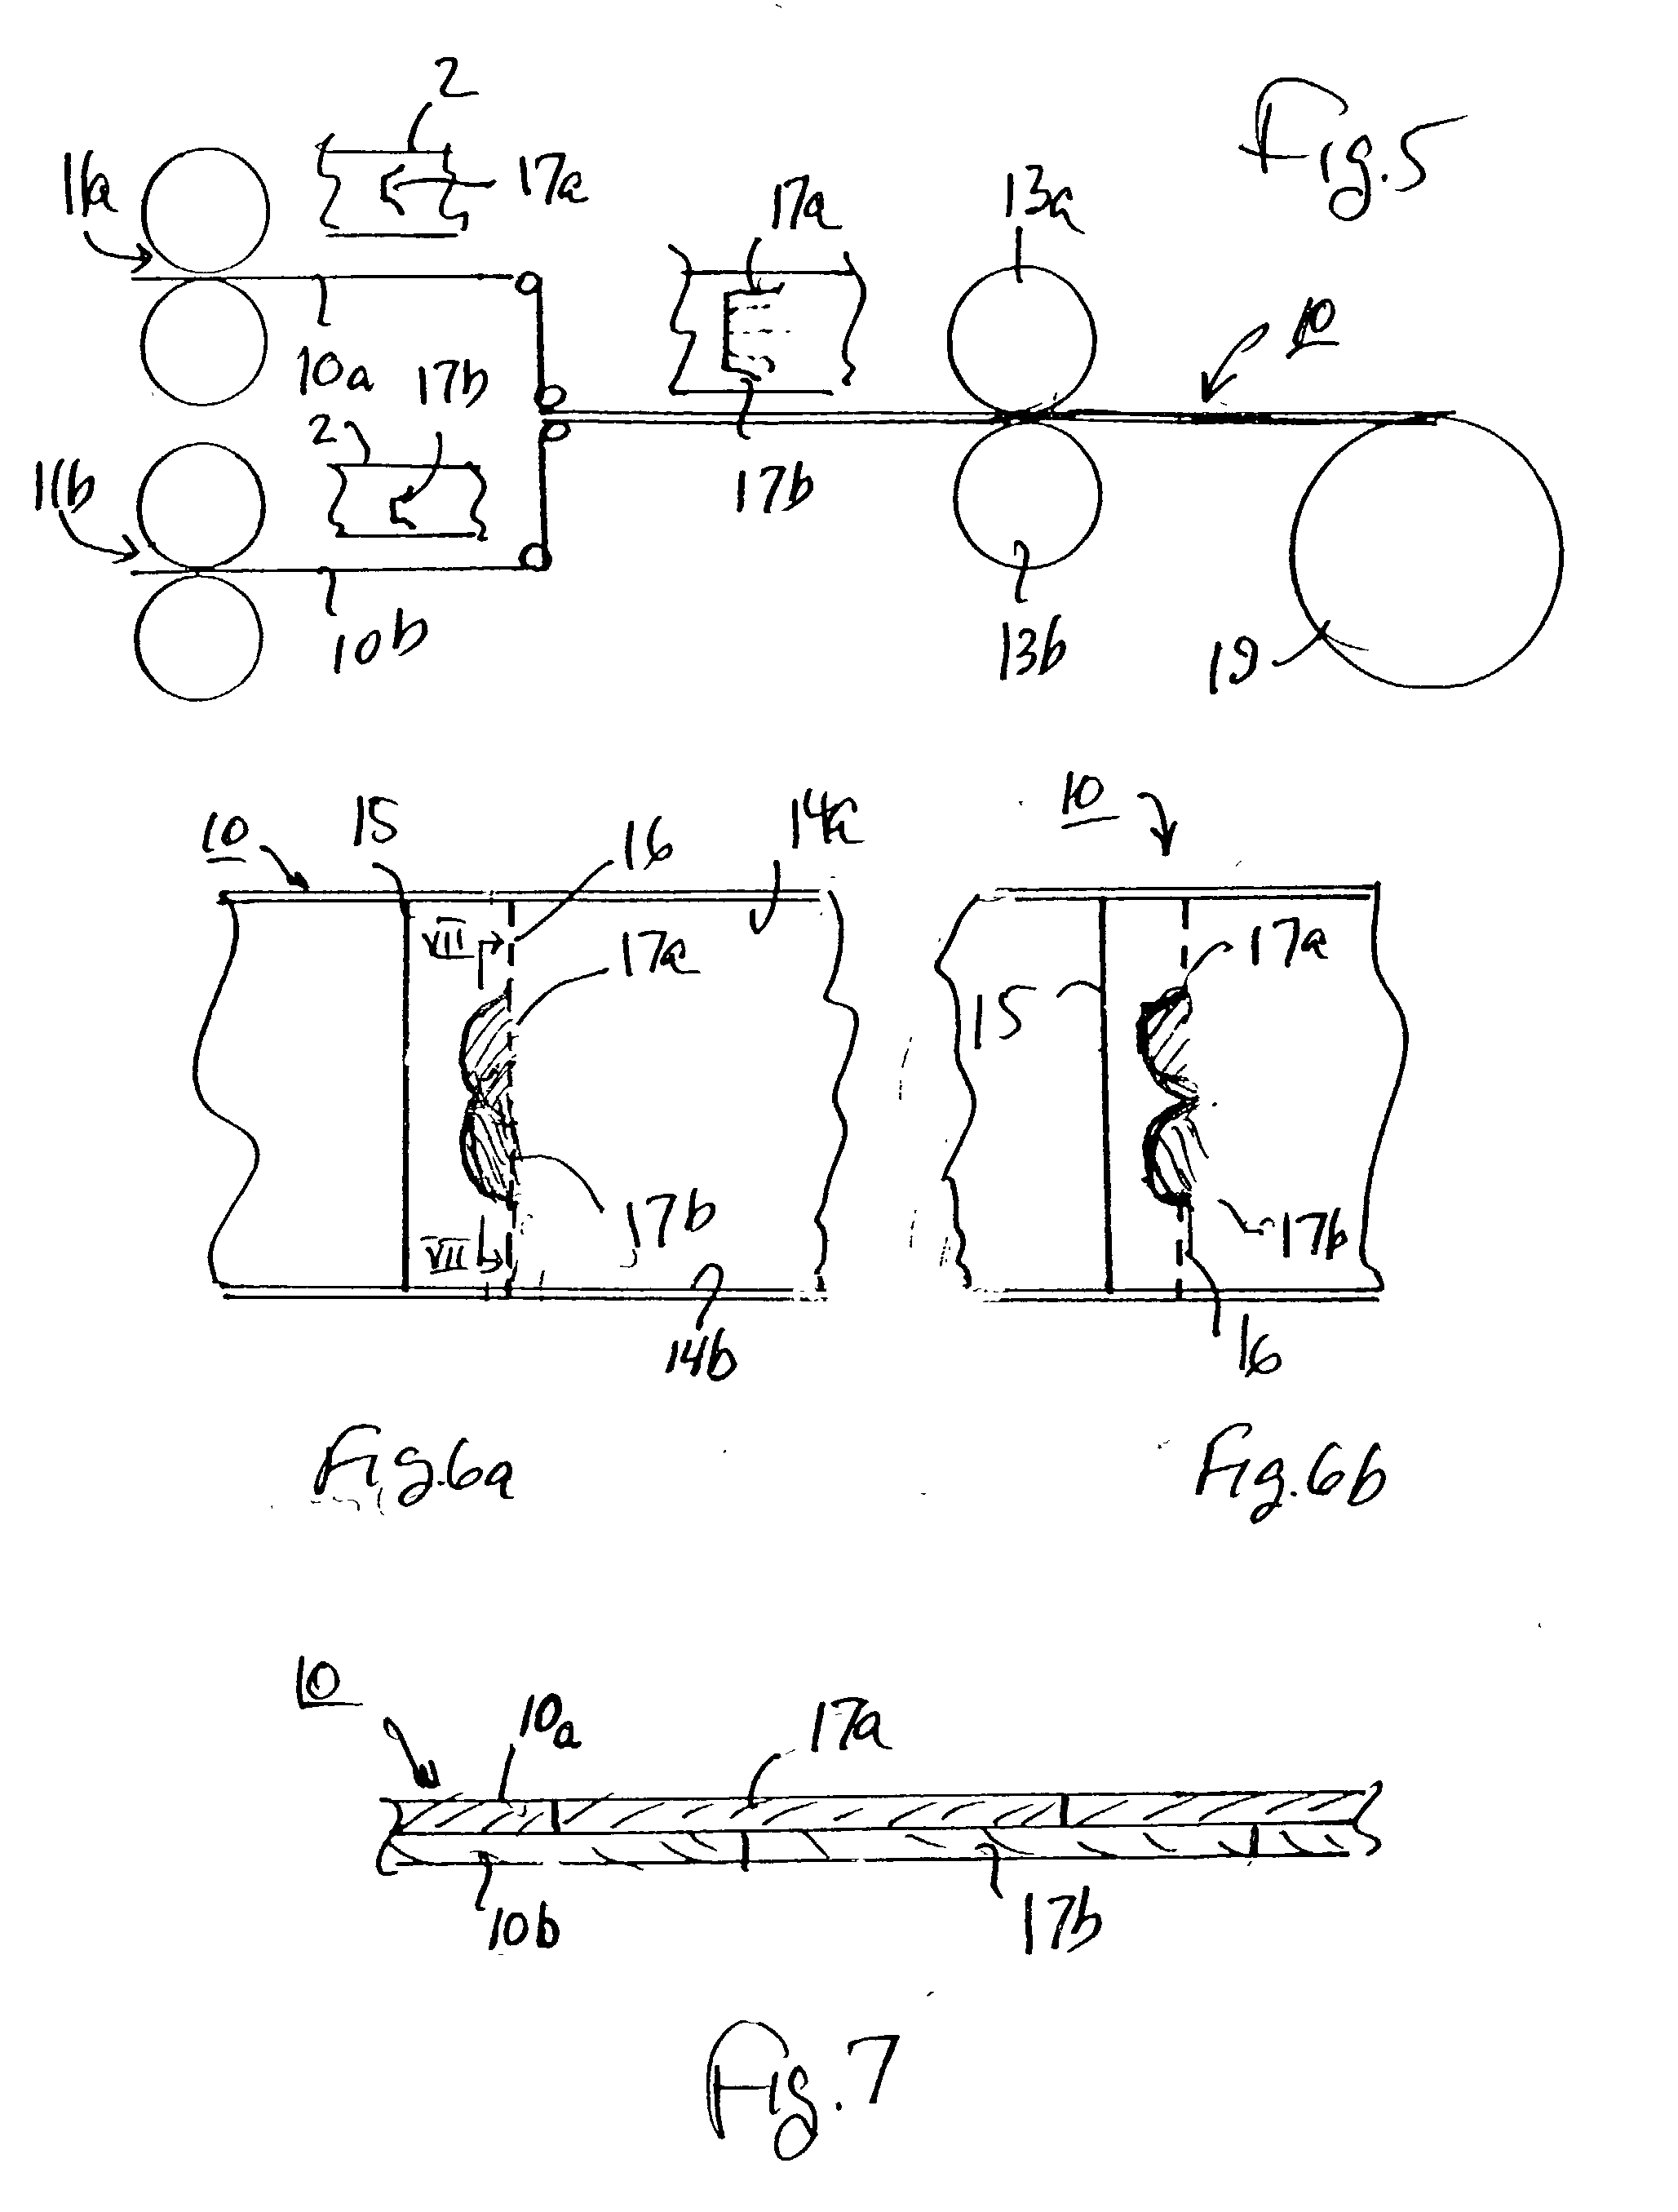 Continuous strip of plastic bags, method and apparatus for making same, and novel plastic bag constructions